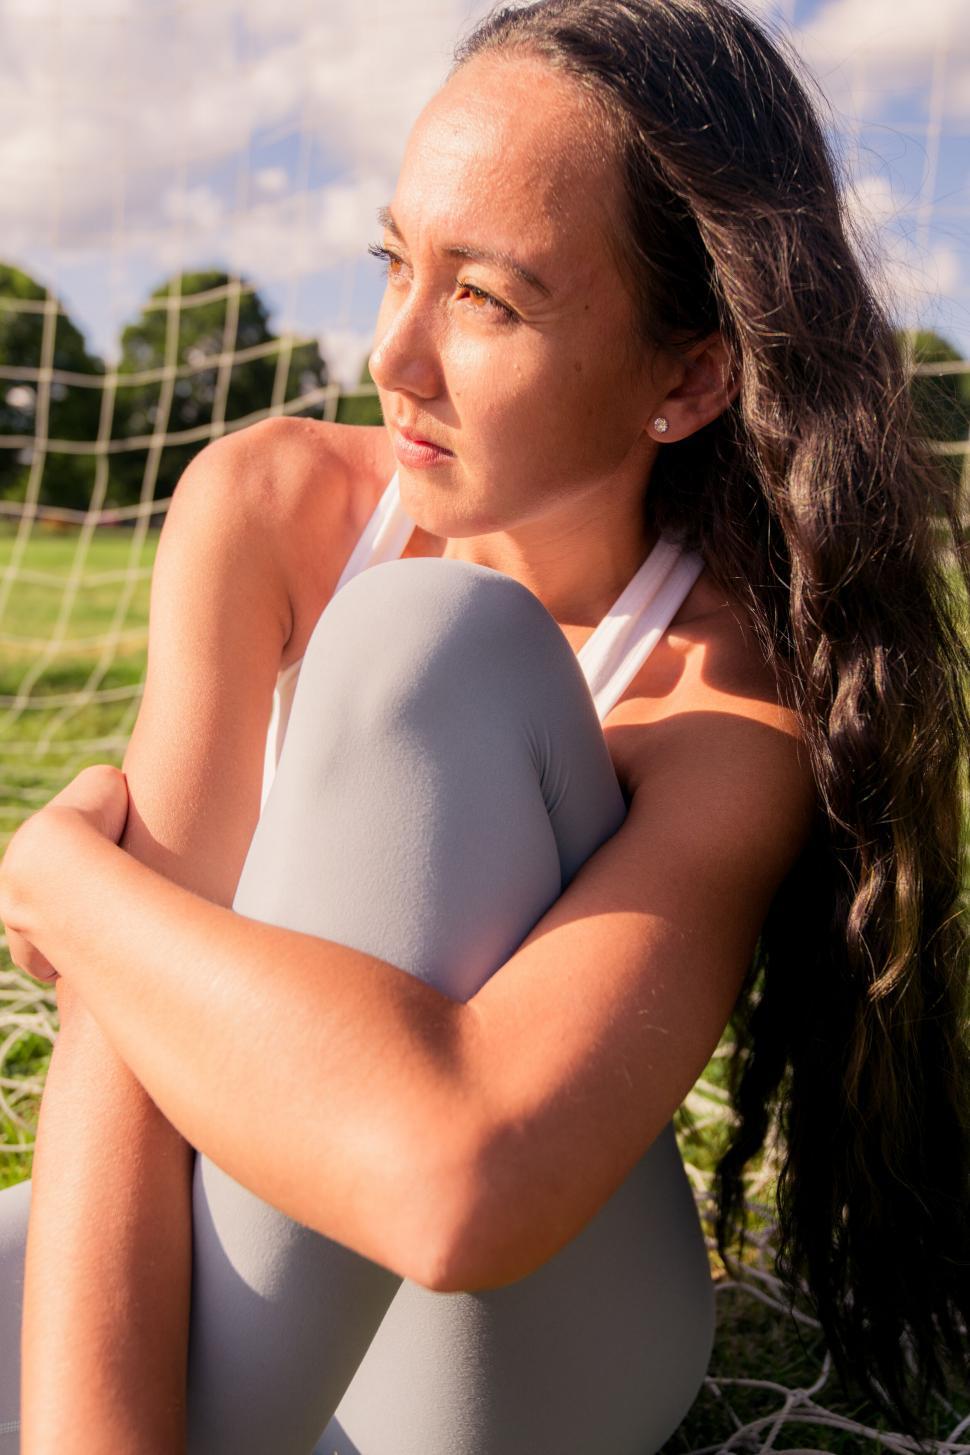 Free Image of Woman in a swimsuit against a sports net 